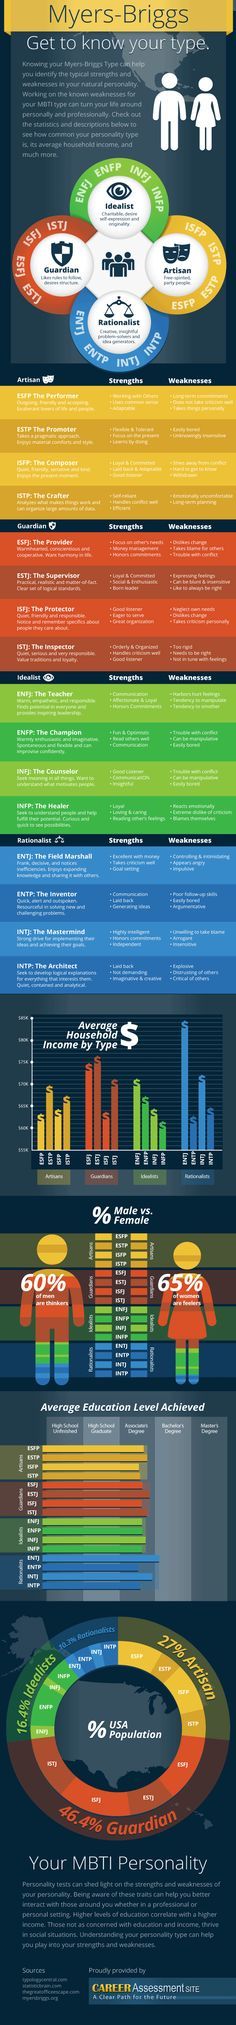 1556805132_37_Infographic-Can-Your-Personality-Type-Affect-Your-Income Infographic : Can Your Personality Type Affect Your Income?